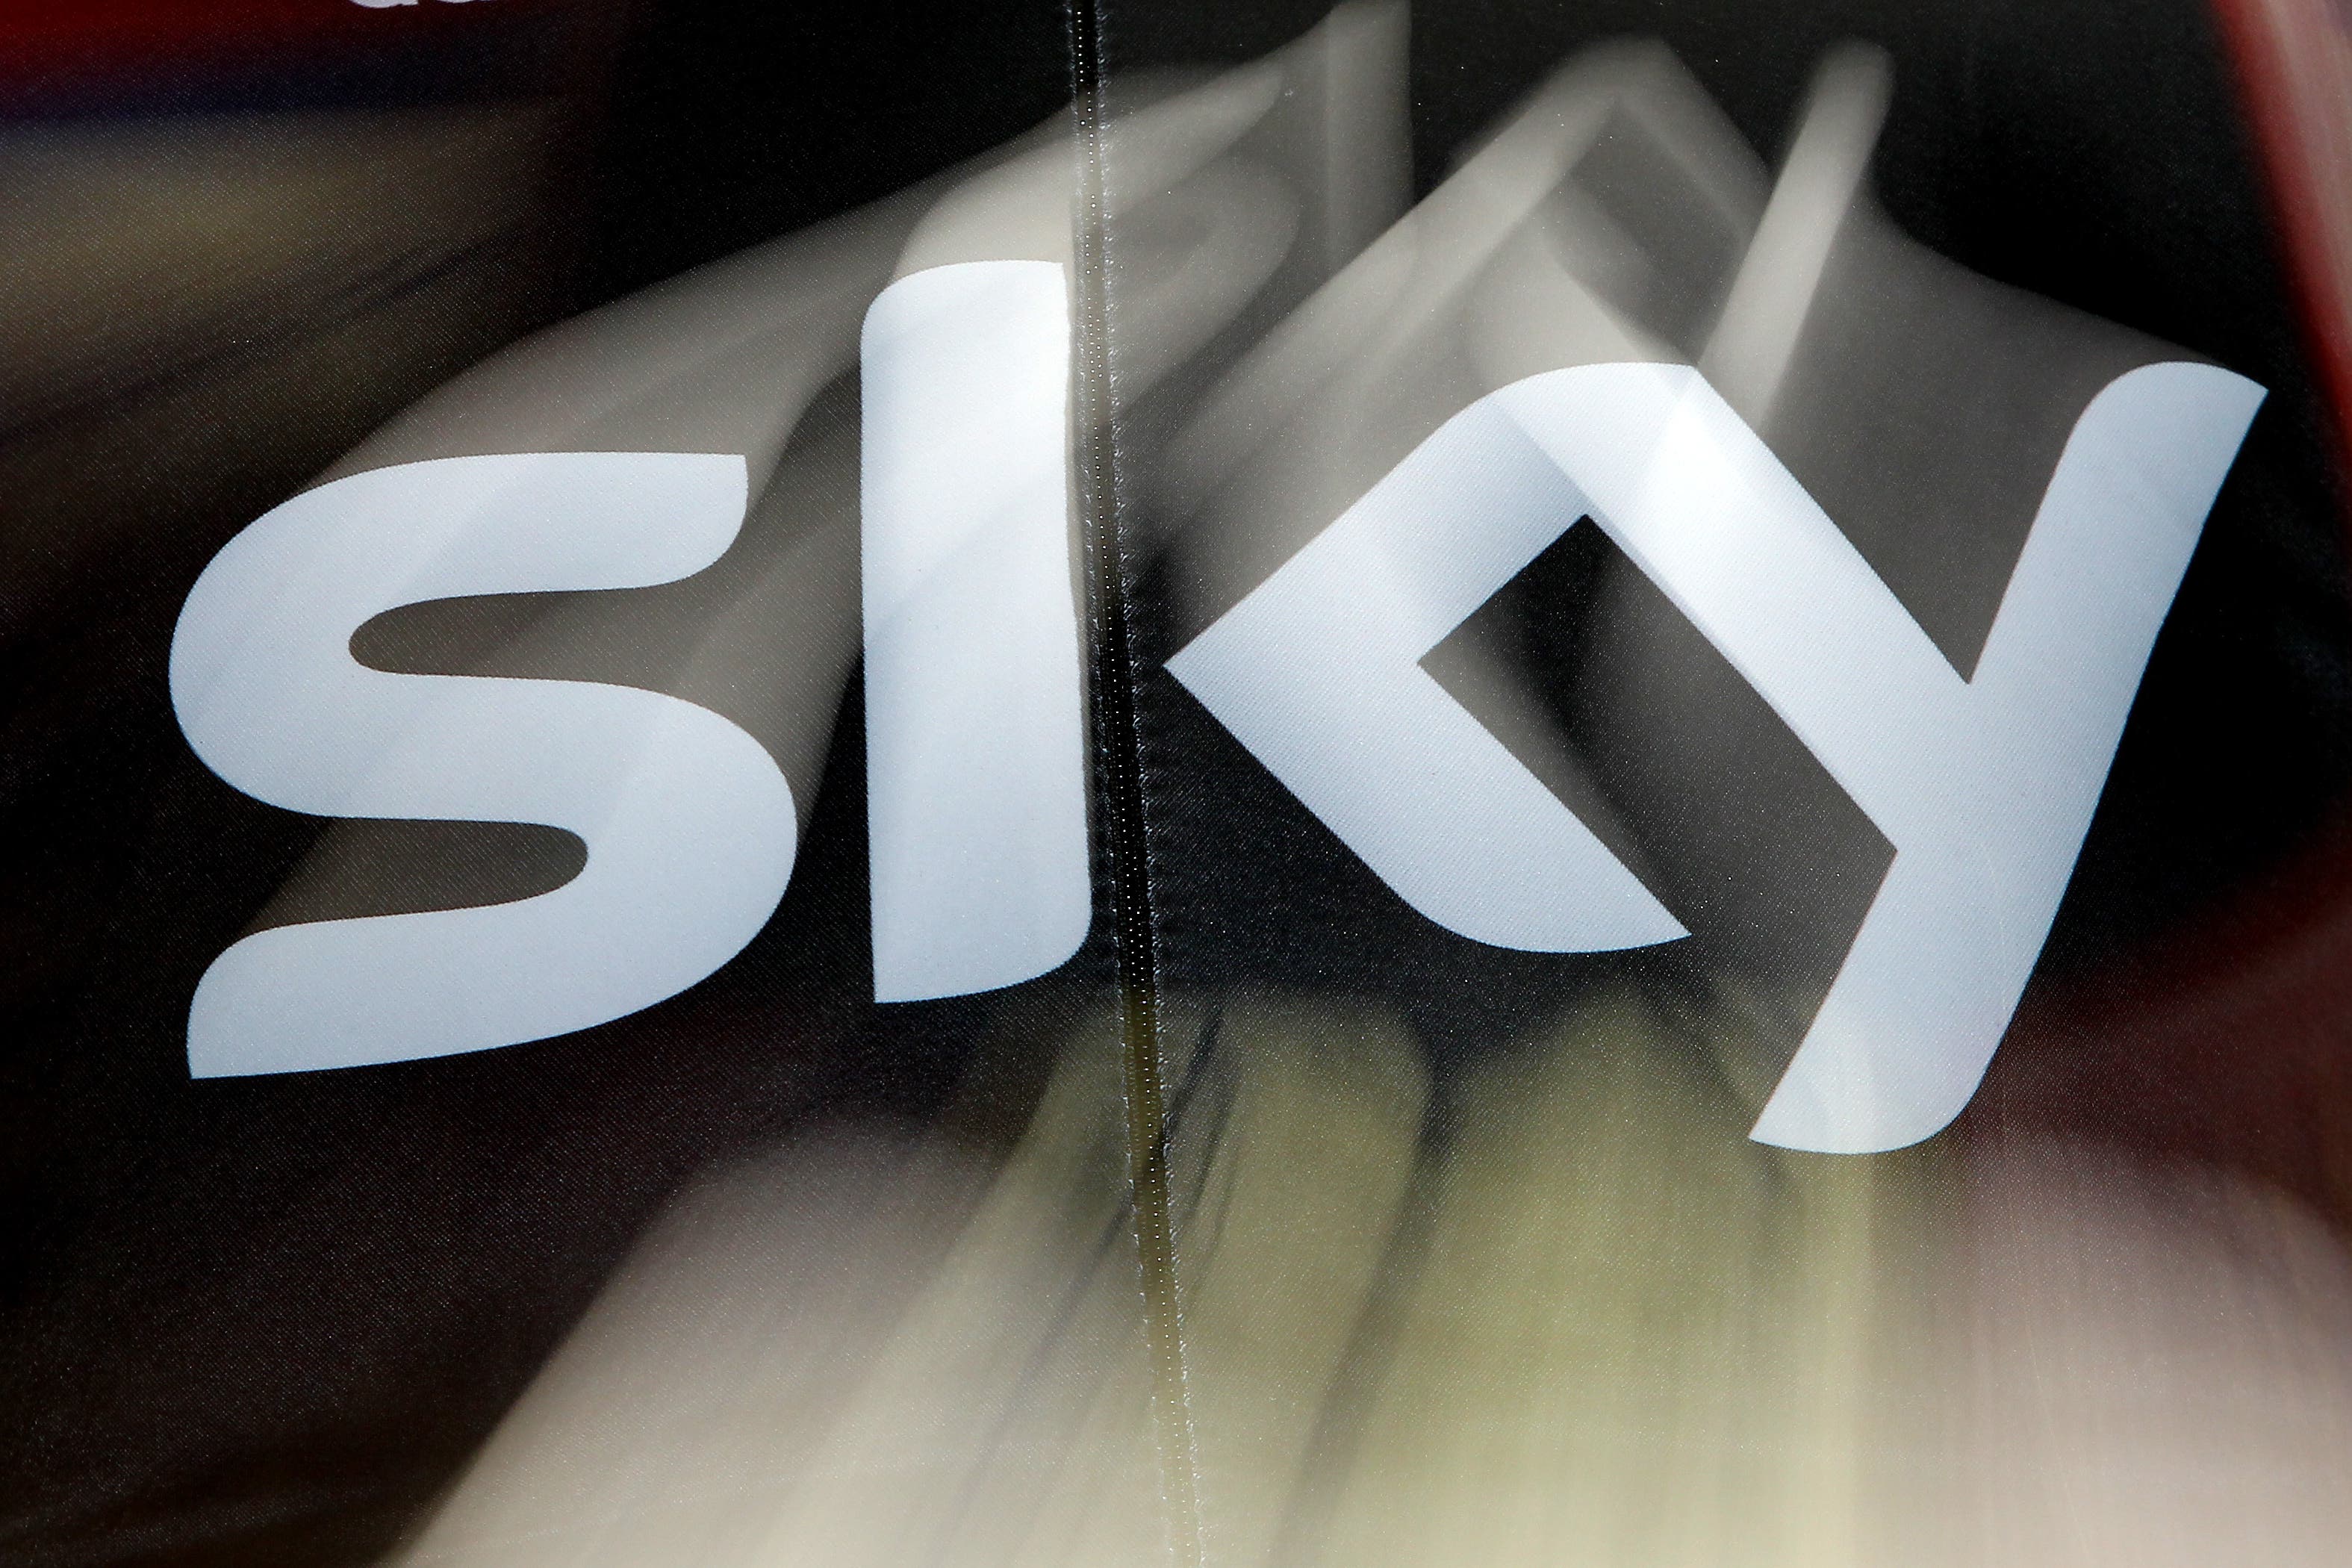 Sky is set to cut around 1,000 jobs in the UK this year (David Jones/PA)